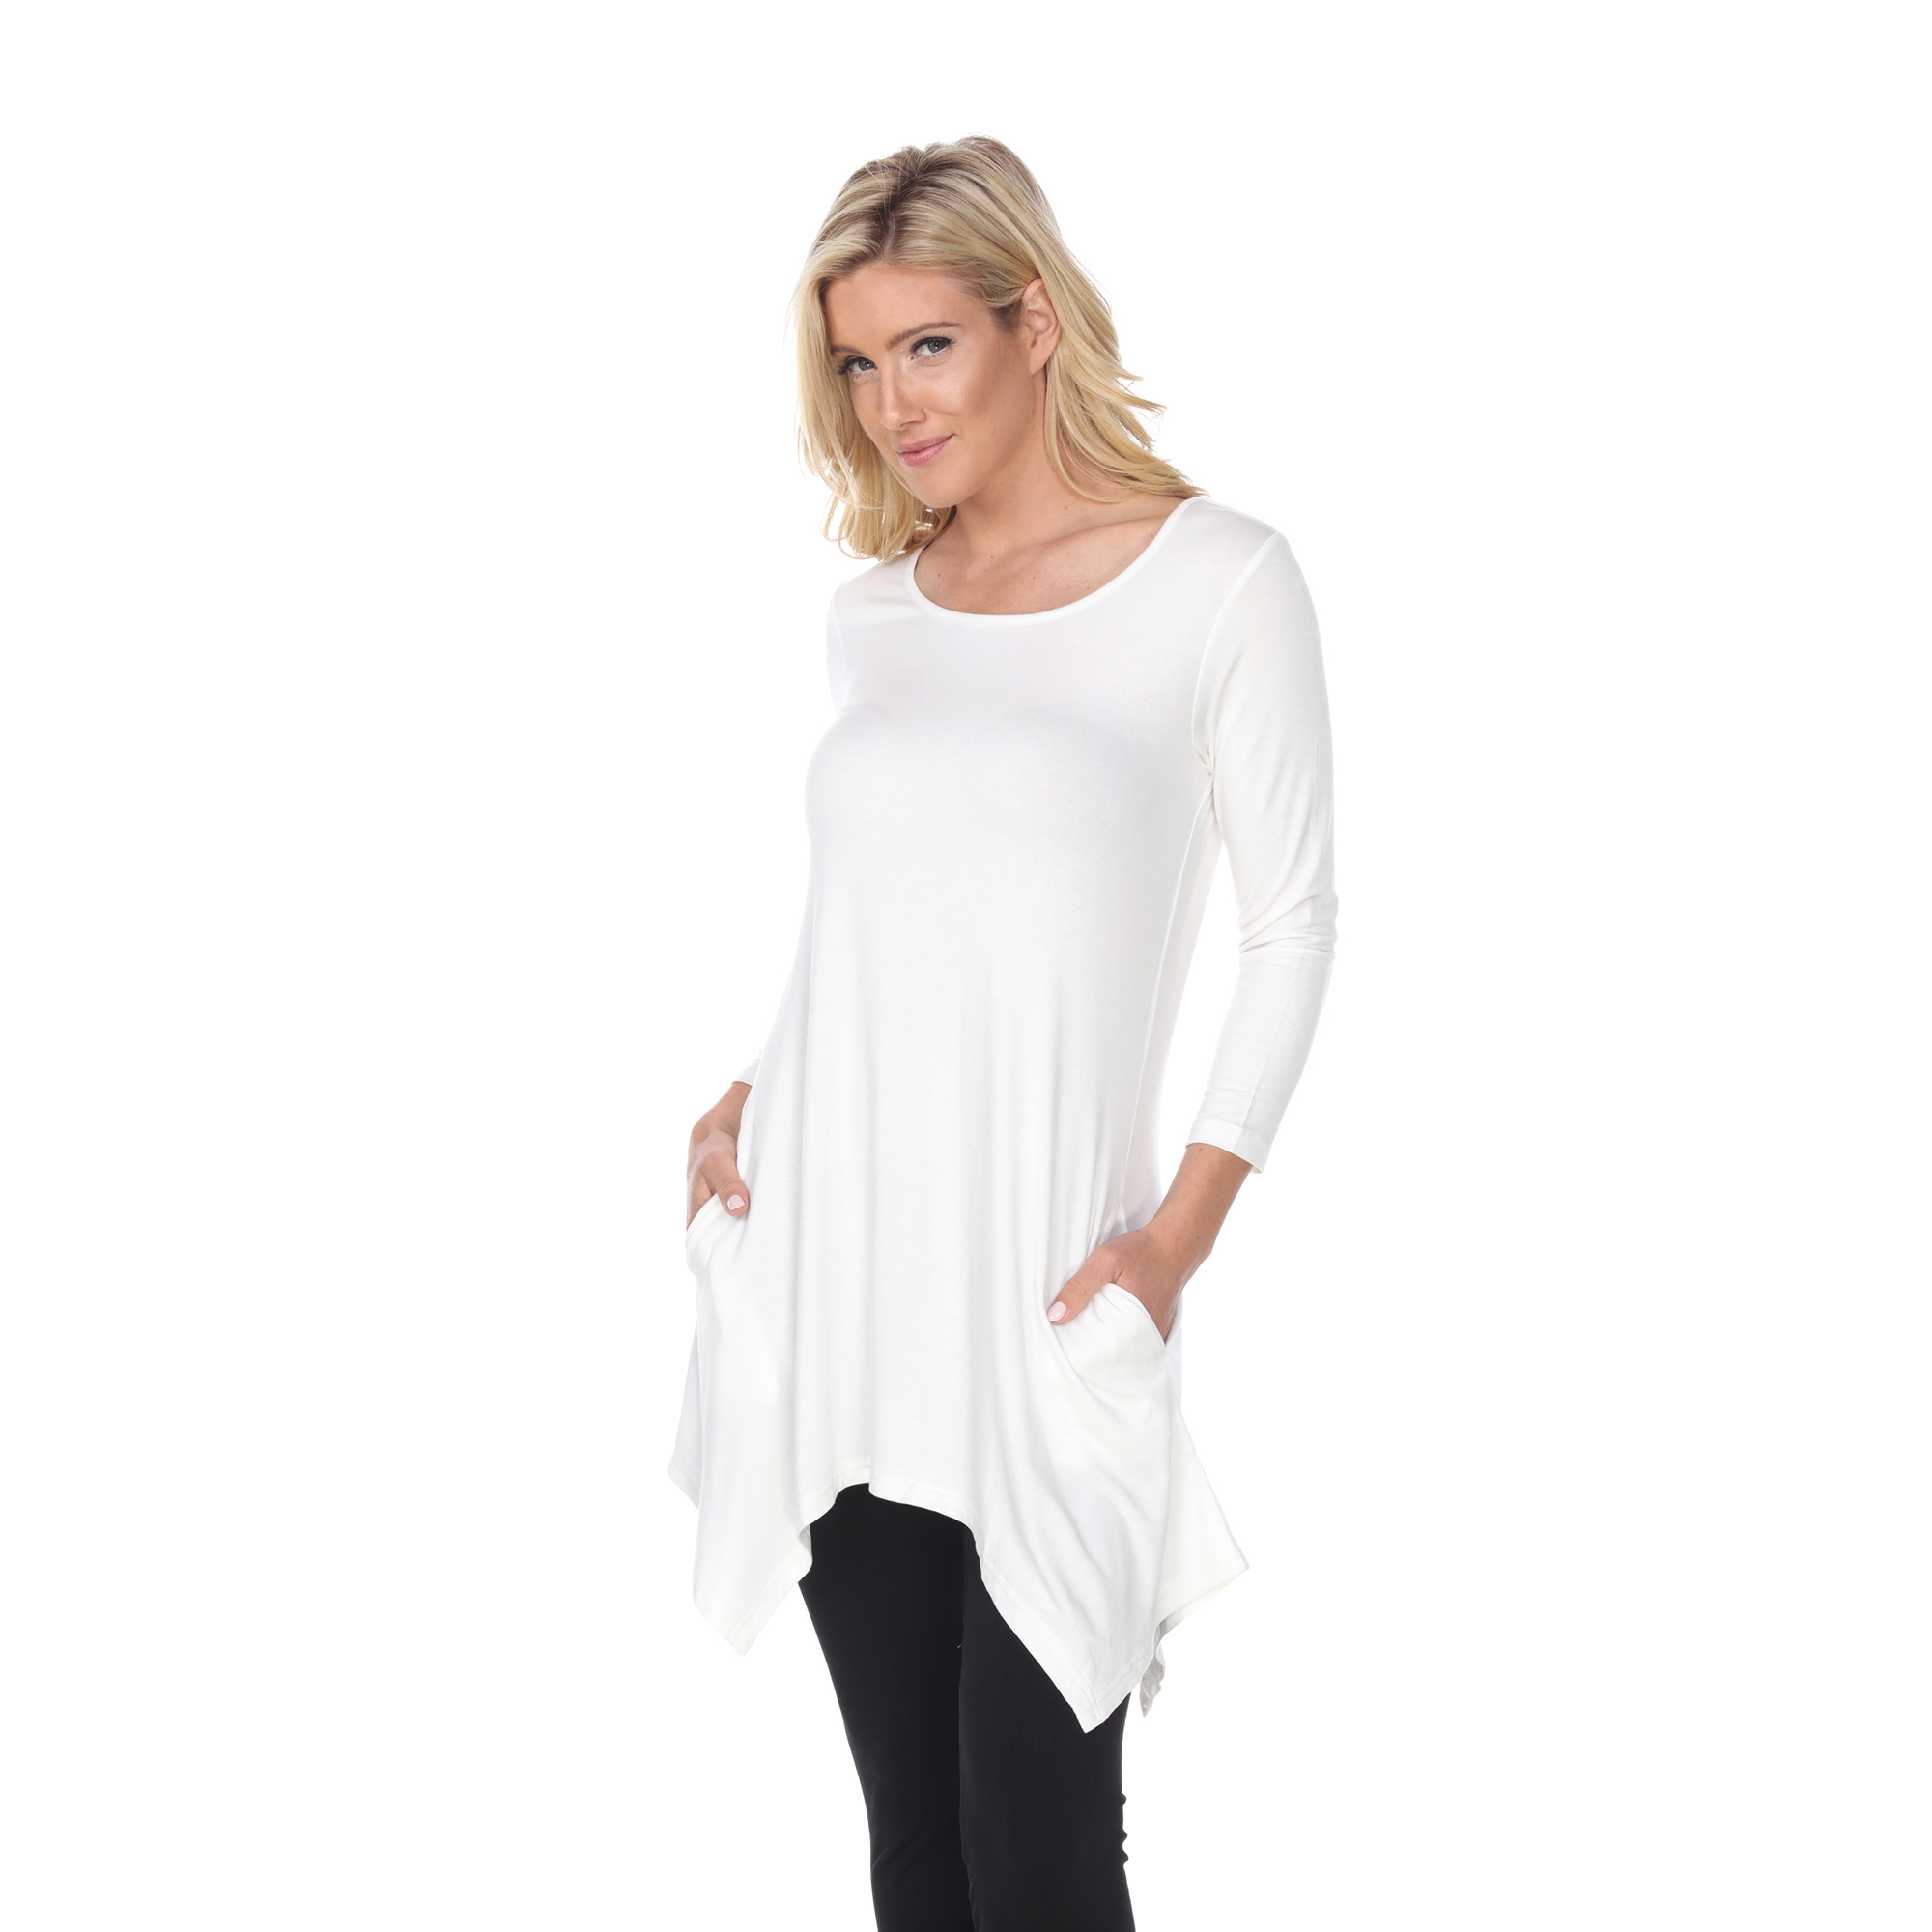 White Mark Women's Quarter Sleeve Tunic Top With Pockets - White, 4X